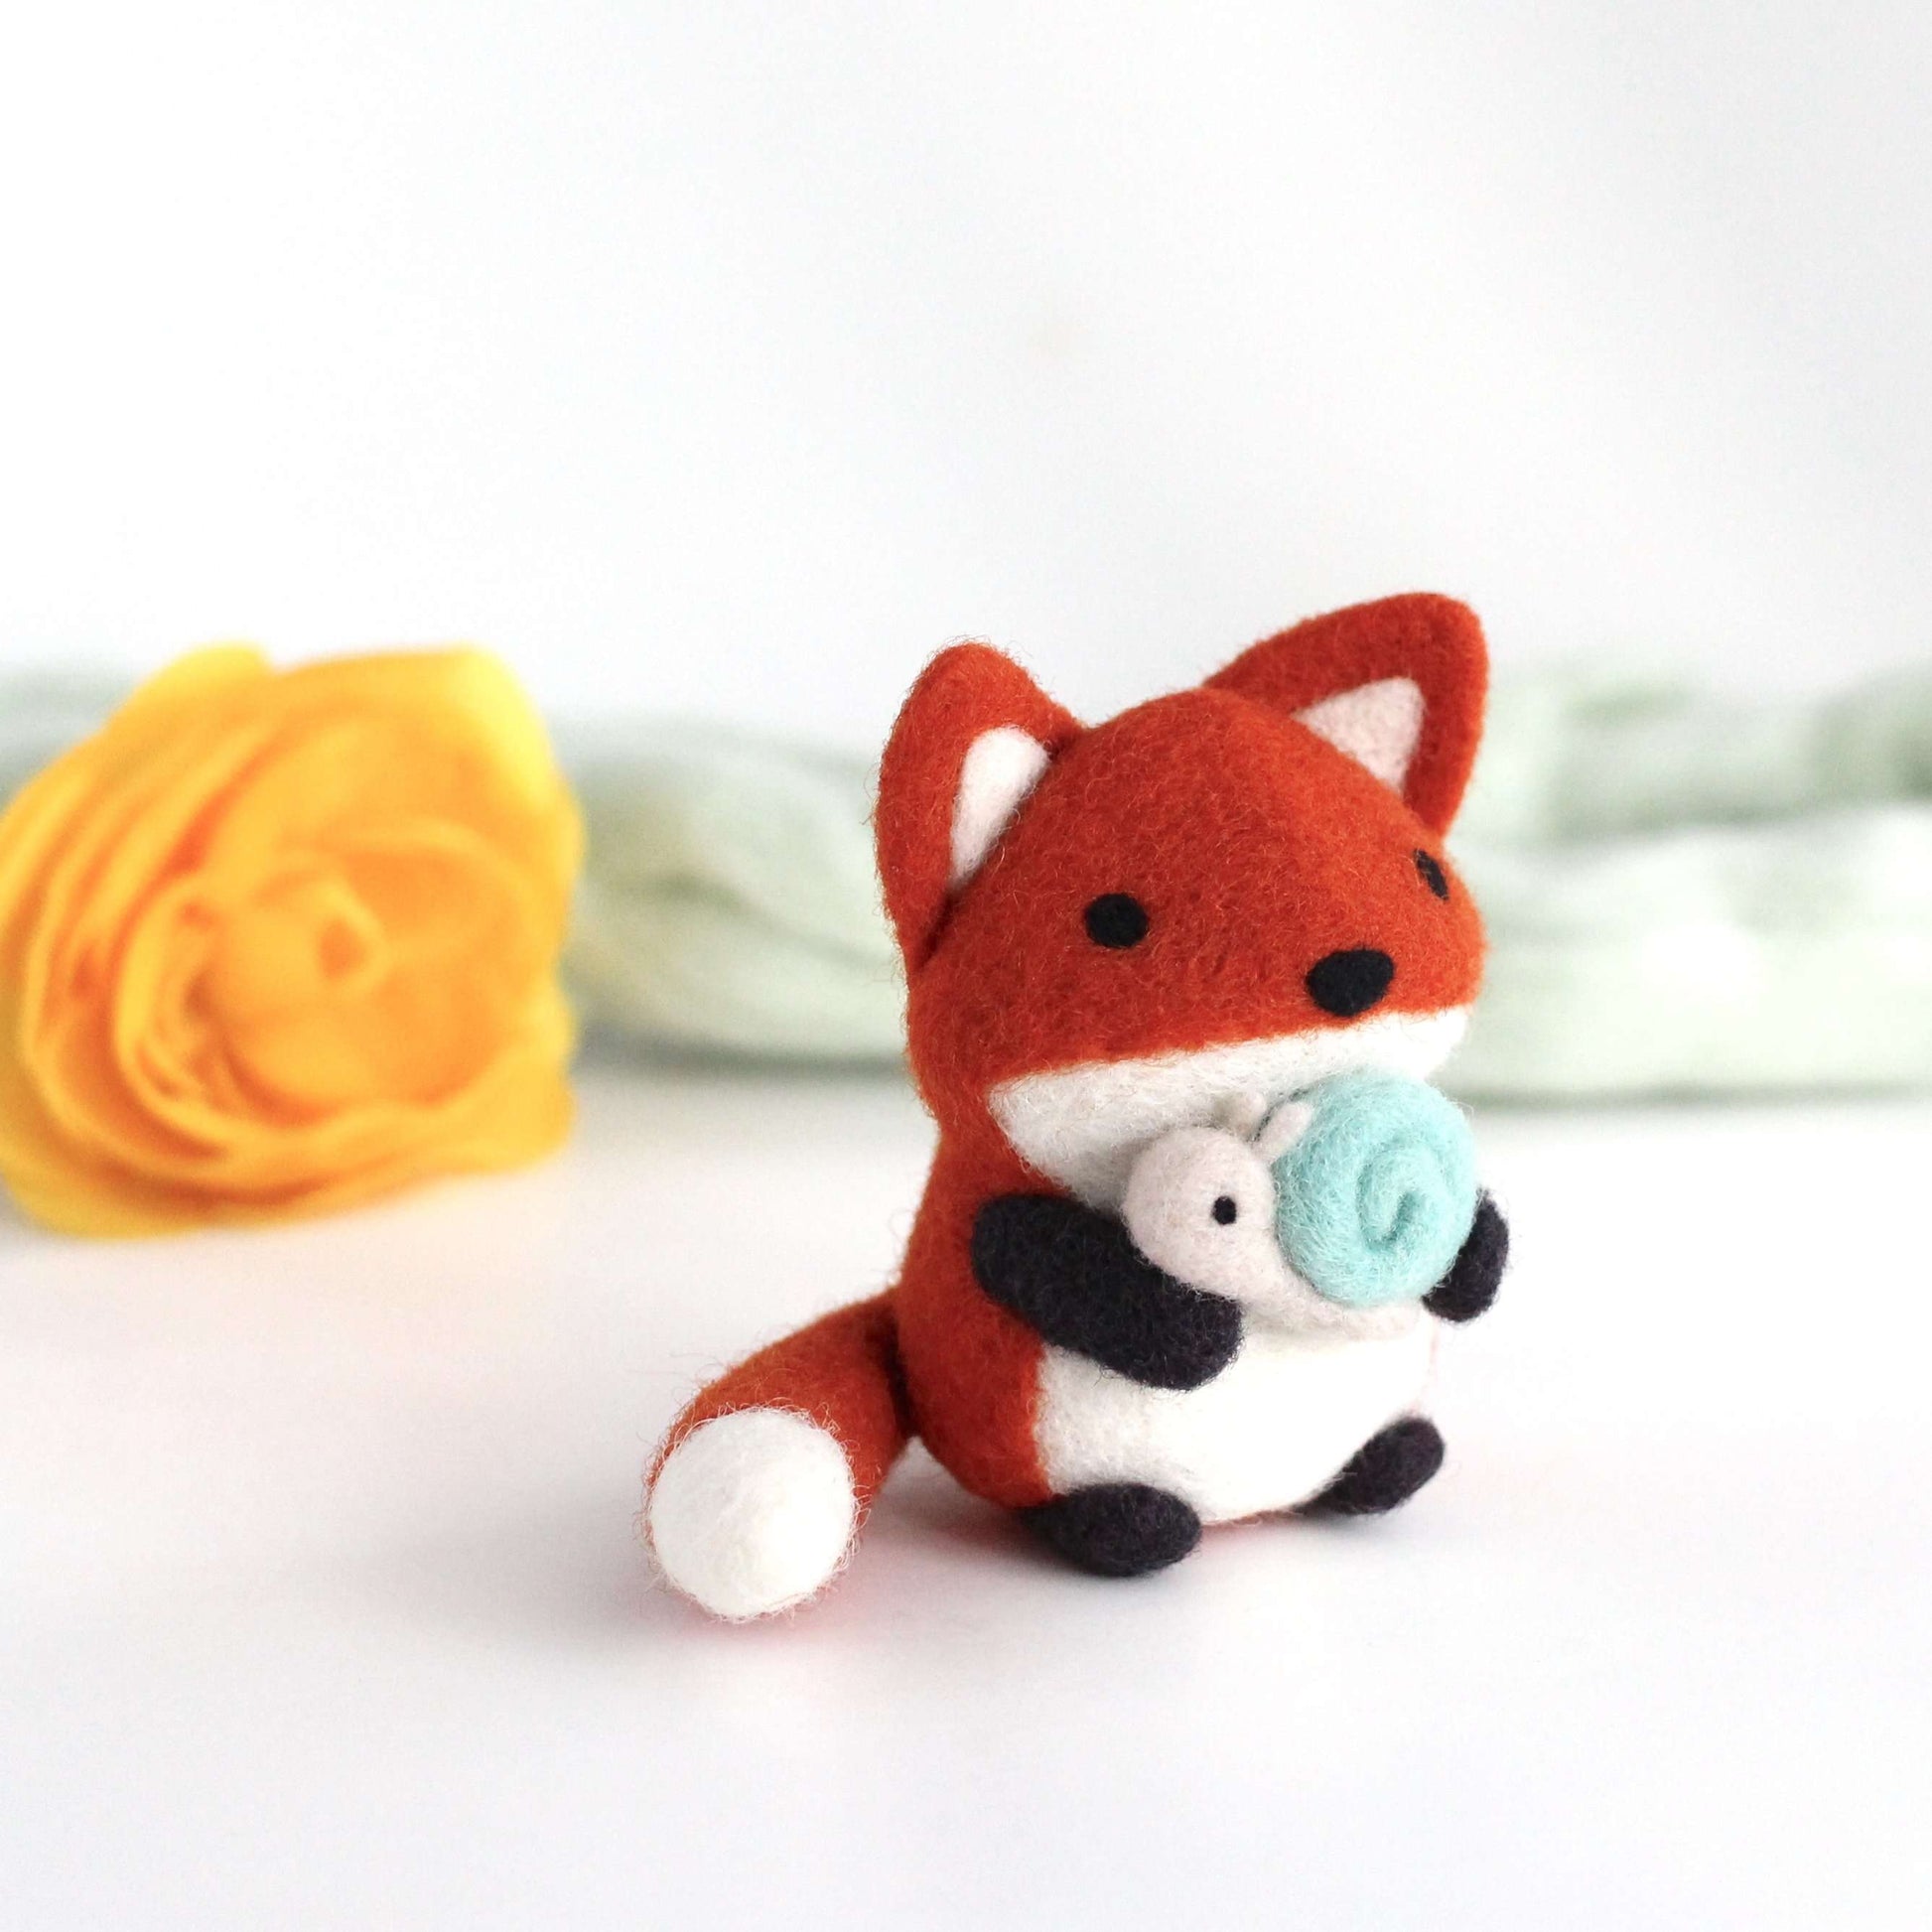 Needle Felted Fox holding Snail by Wild Whimsy Woolies